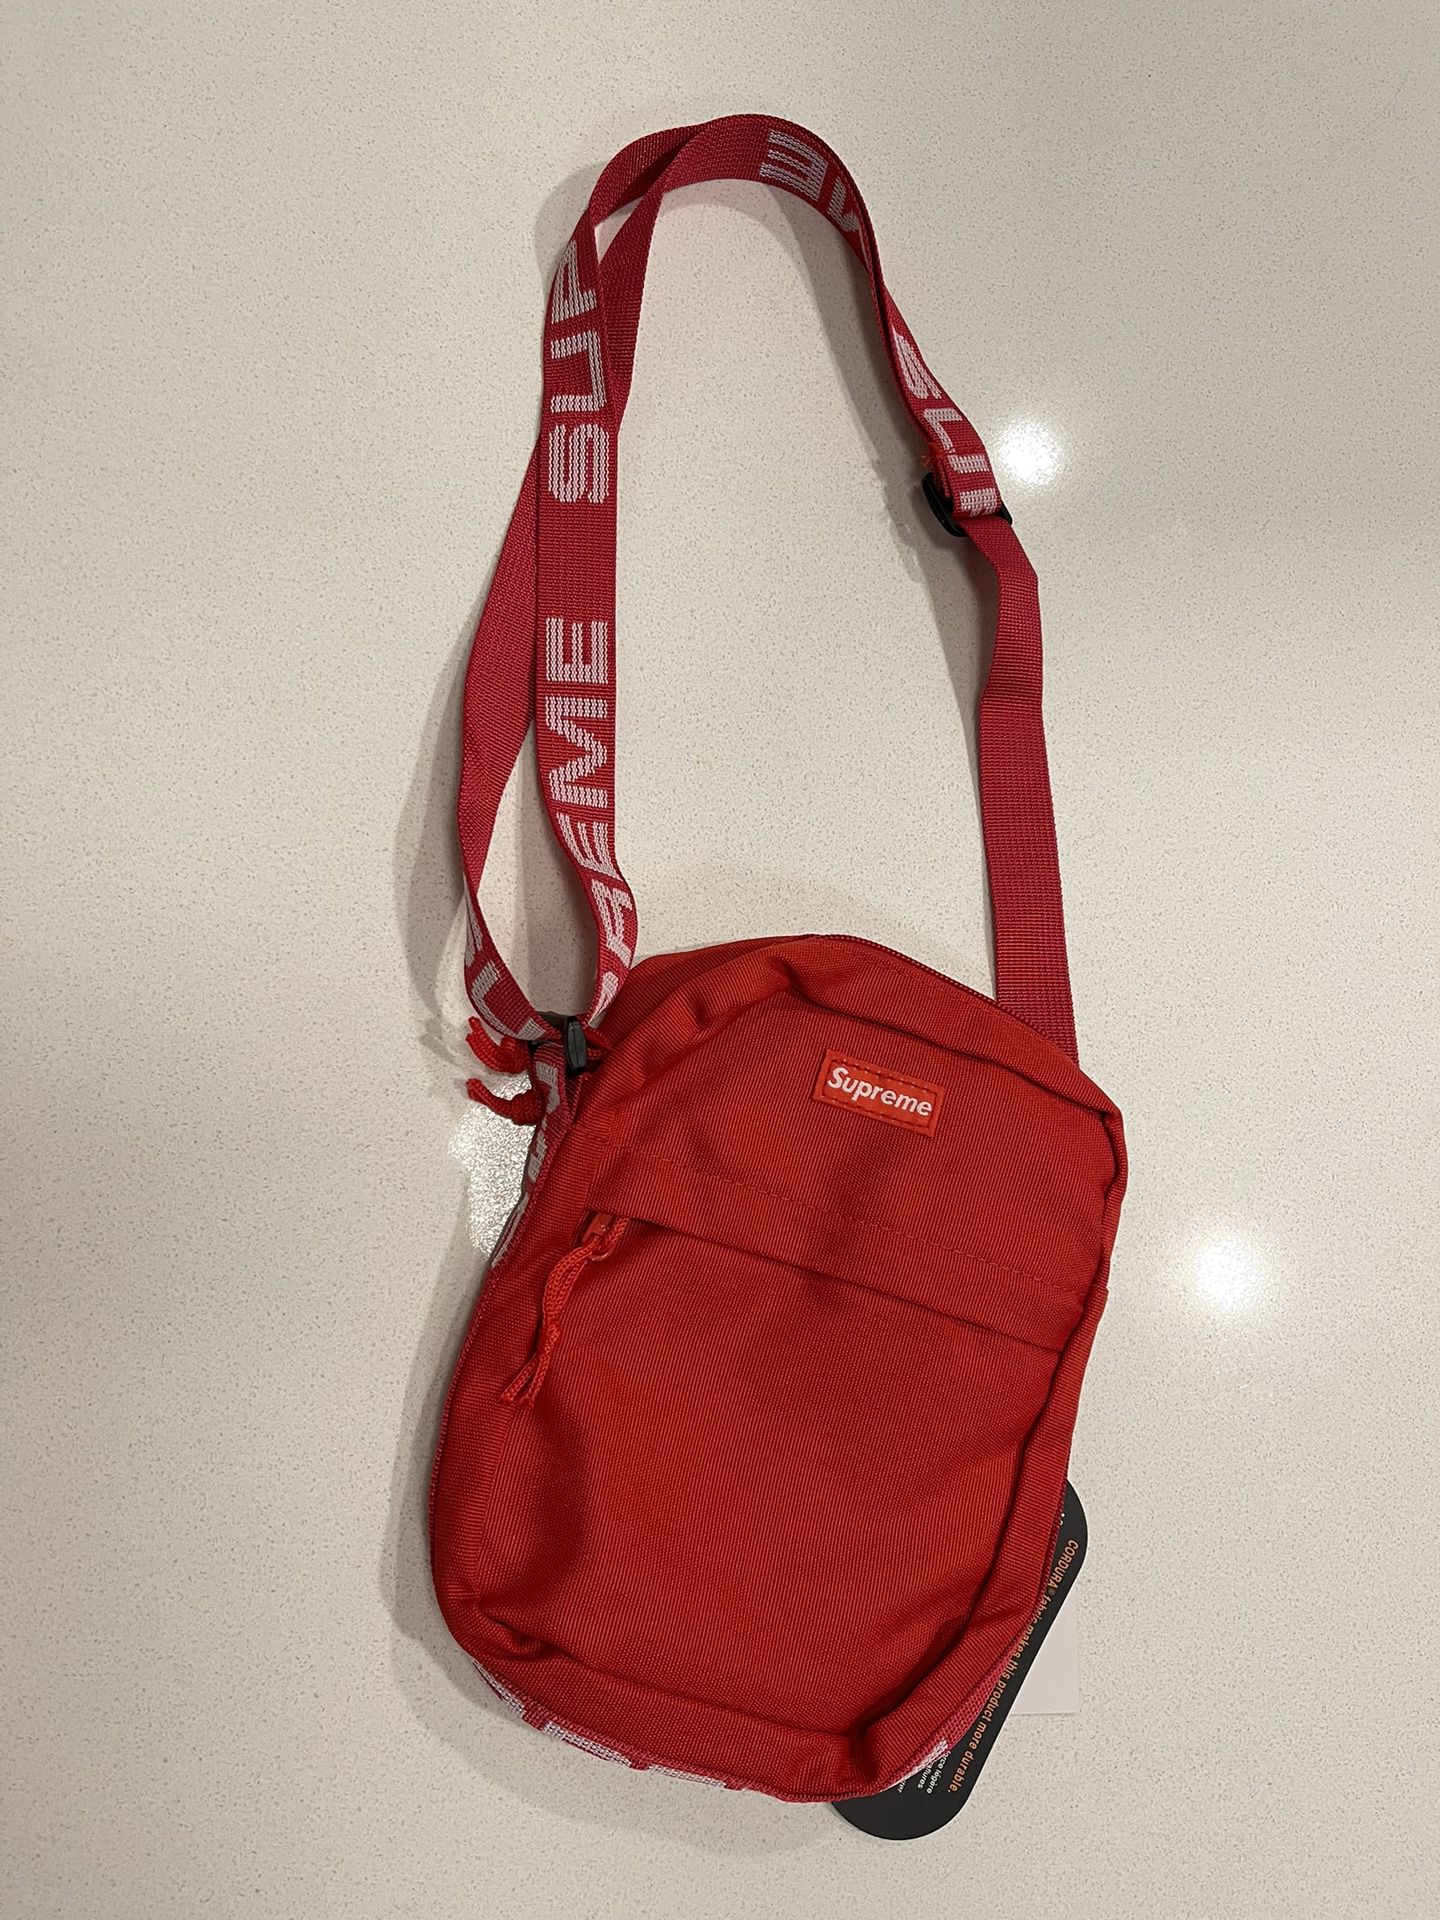 Supreme One Strap Bag (check out my page🔥) 